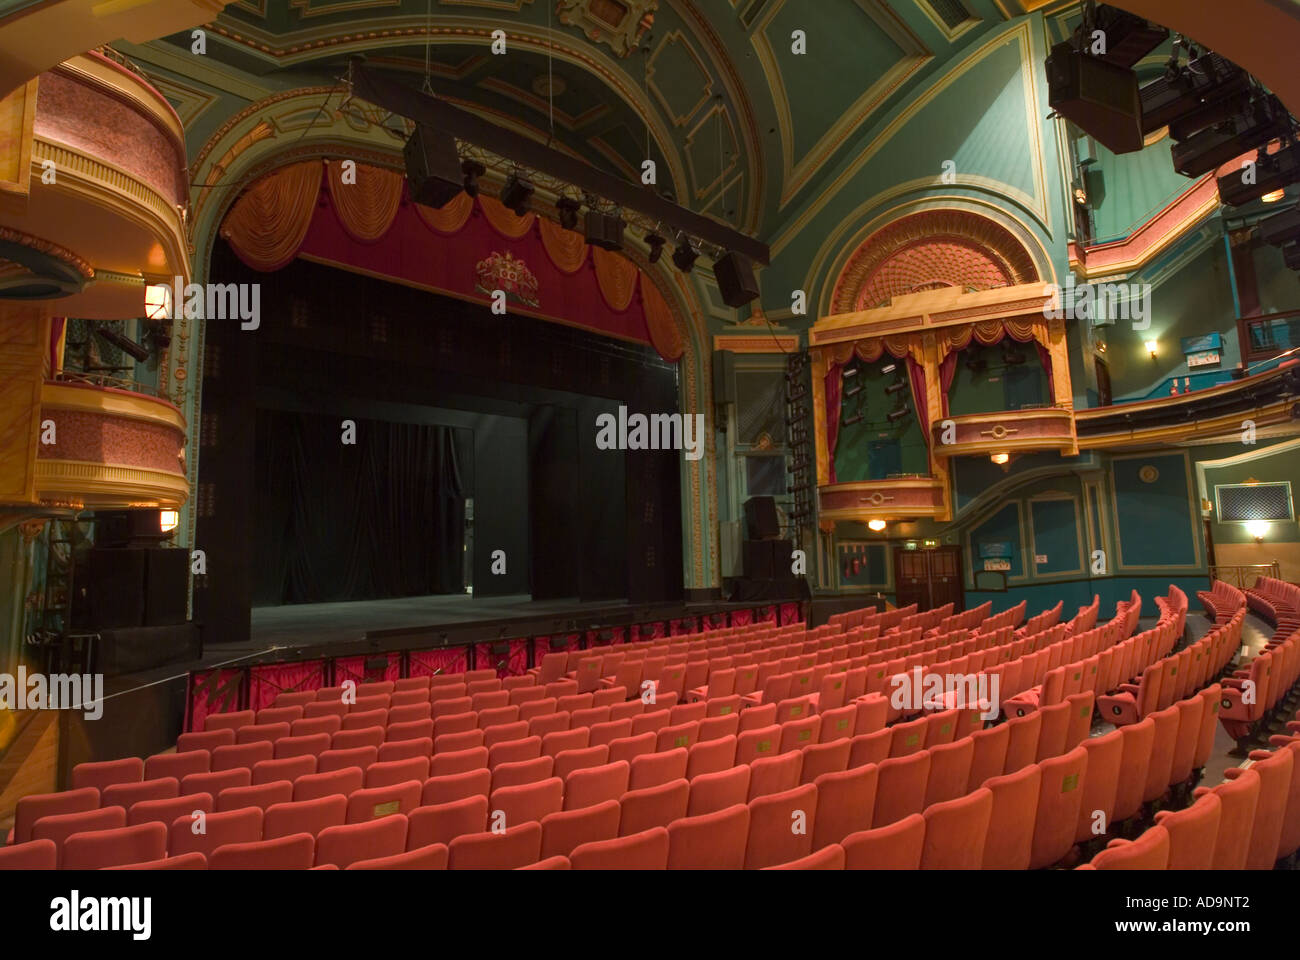 Interior of the Mayflower Theatre in Southampton, England Stock Photo